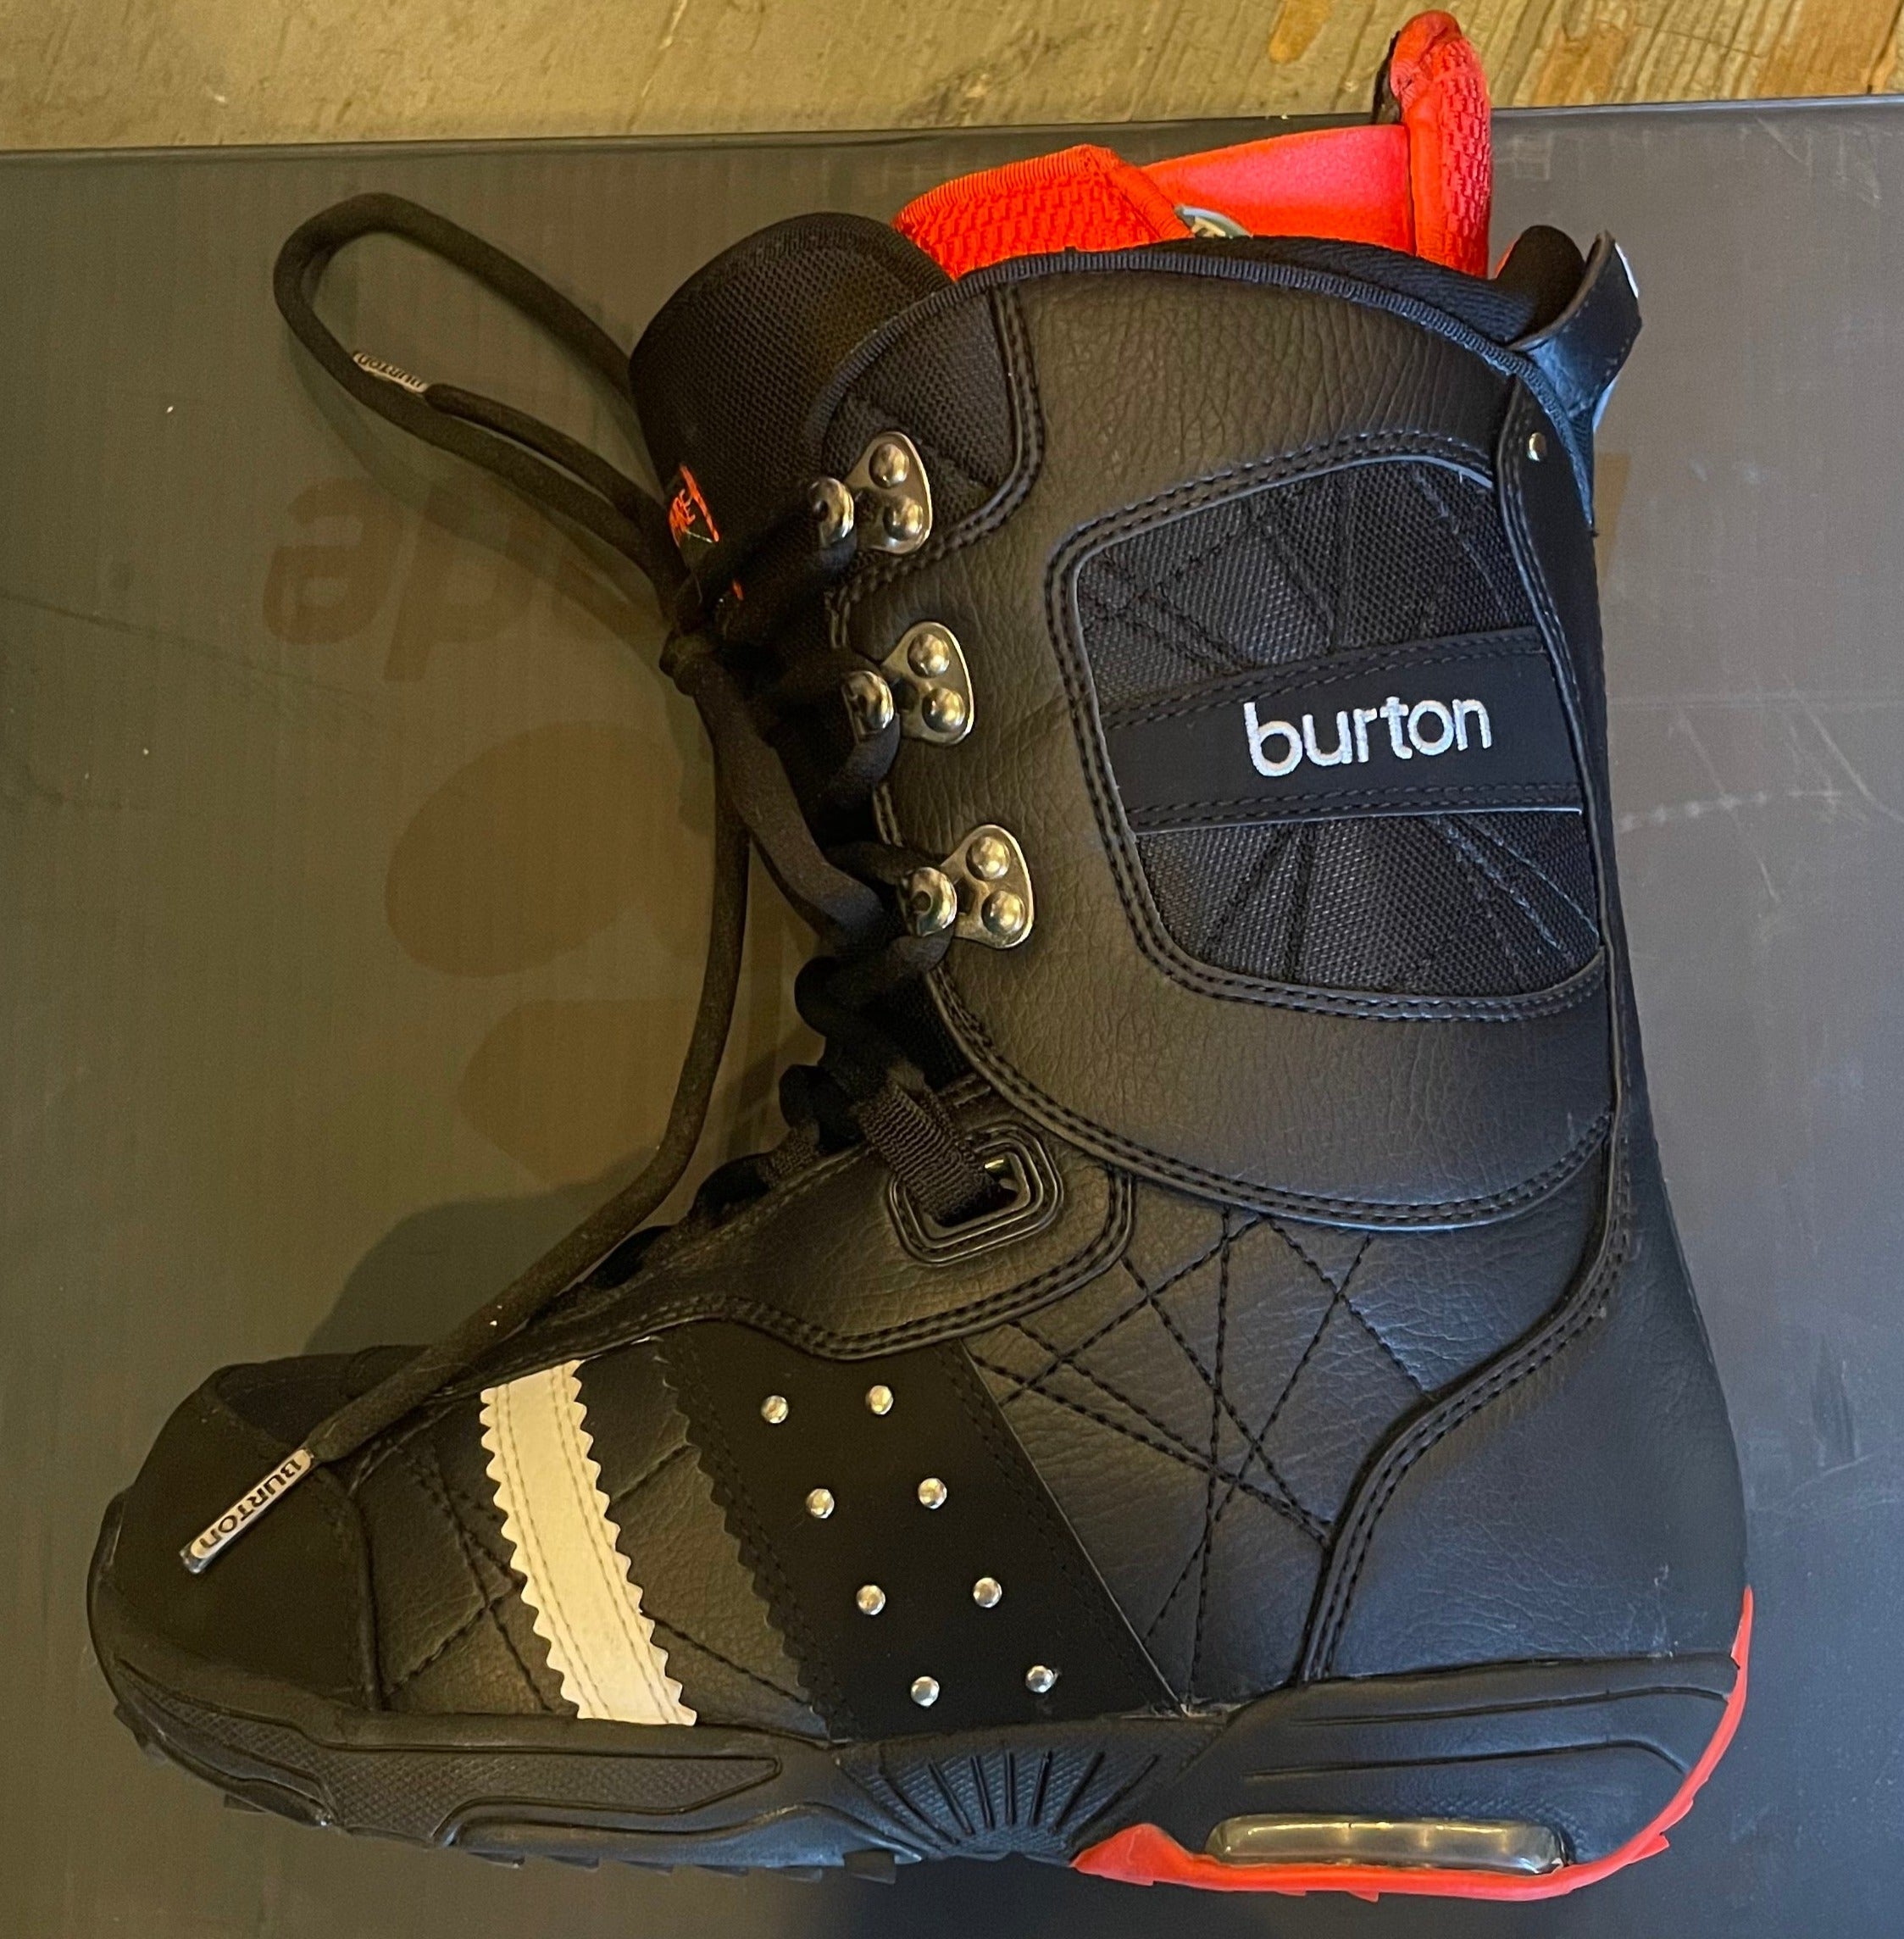 Burton Sapphire Womens Snowboard Boots - Size USW 7.5 Only